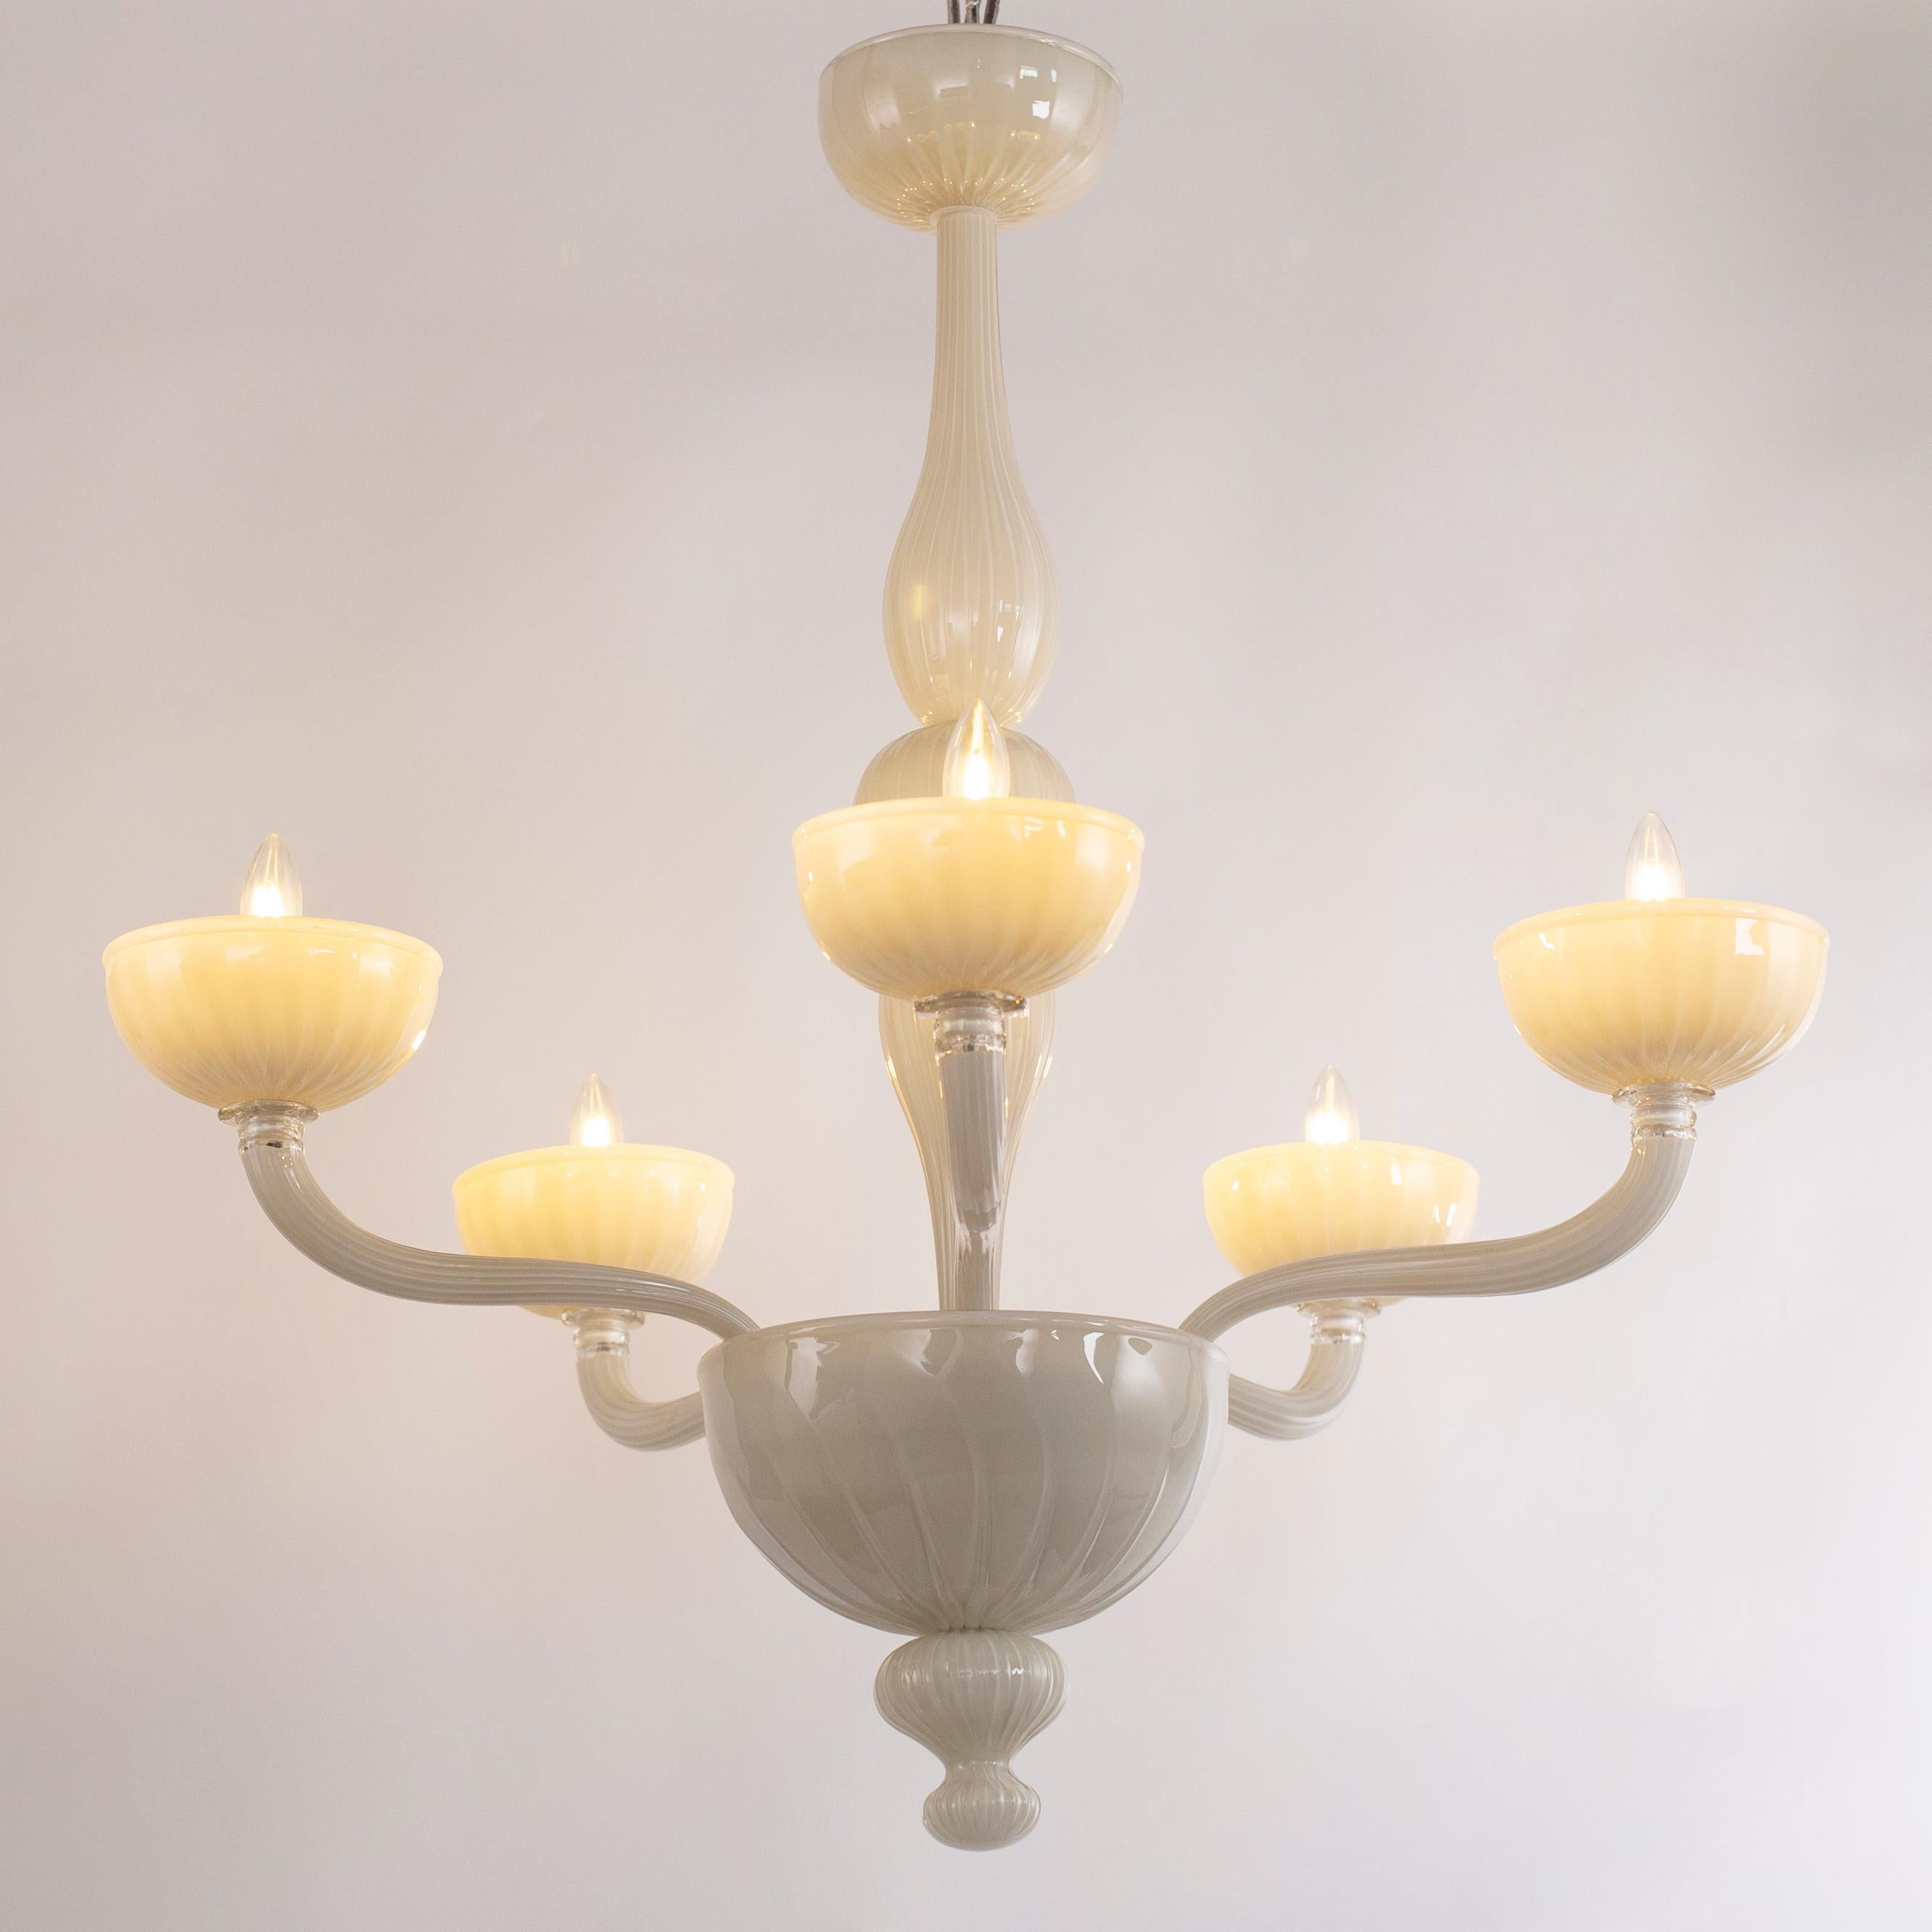 Edgar chandelier, 5 lights, Ivory encased rigadin Murano glass by Multiforme
Edgar Murano glass chandelier is one of those chandeliers in our collections that stands out thanks to its harmonious and balanced shapes. We have designed a chandelier